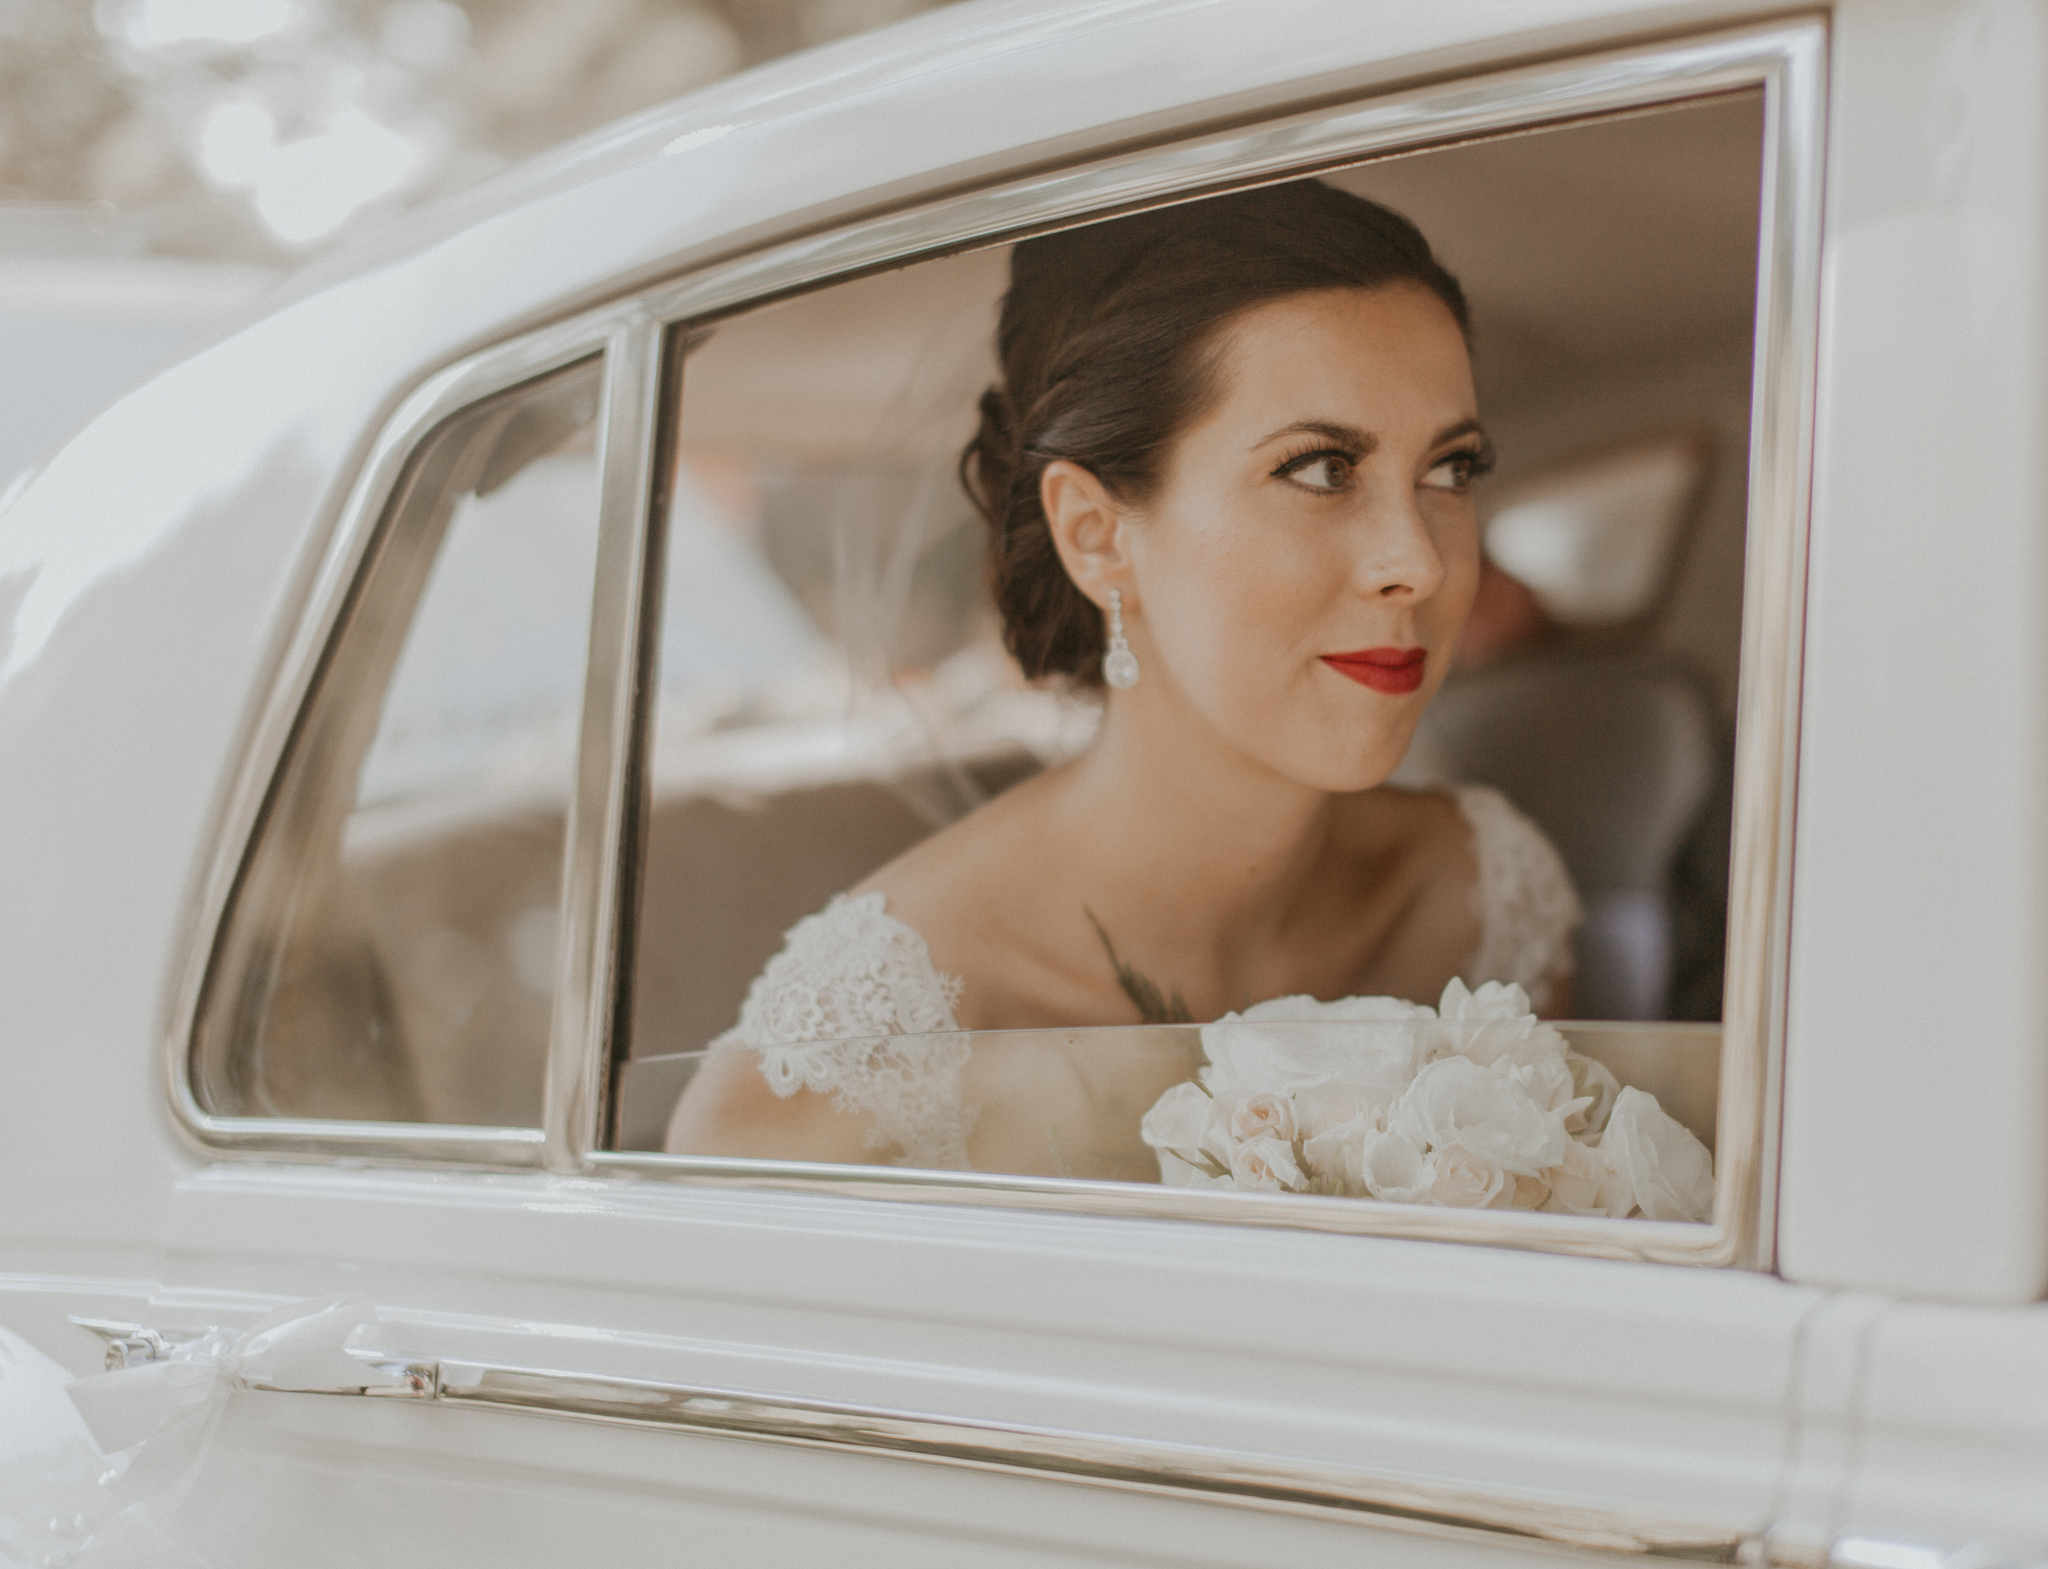 Picture of bride in car window on wedding day